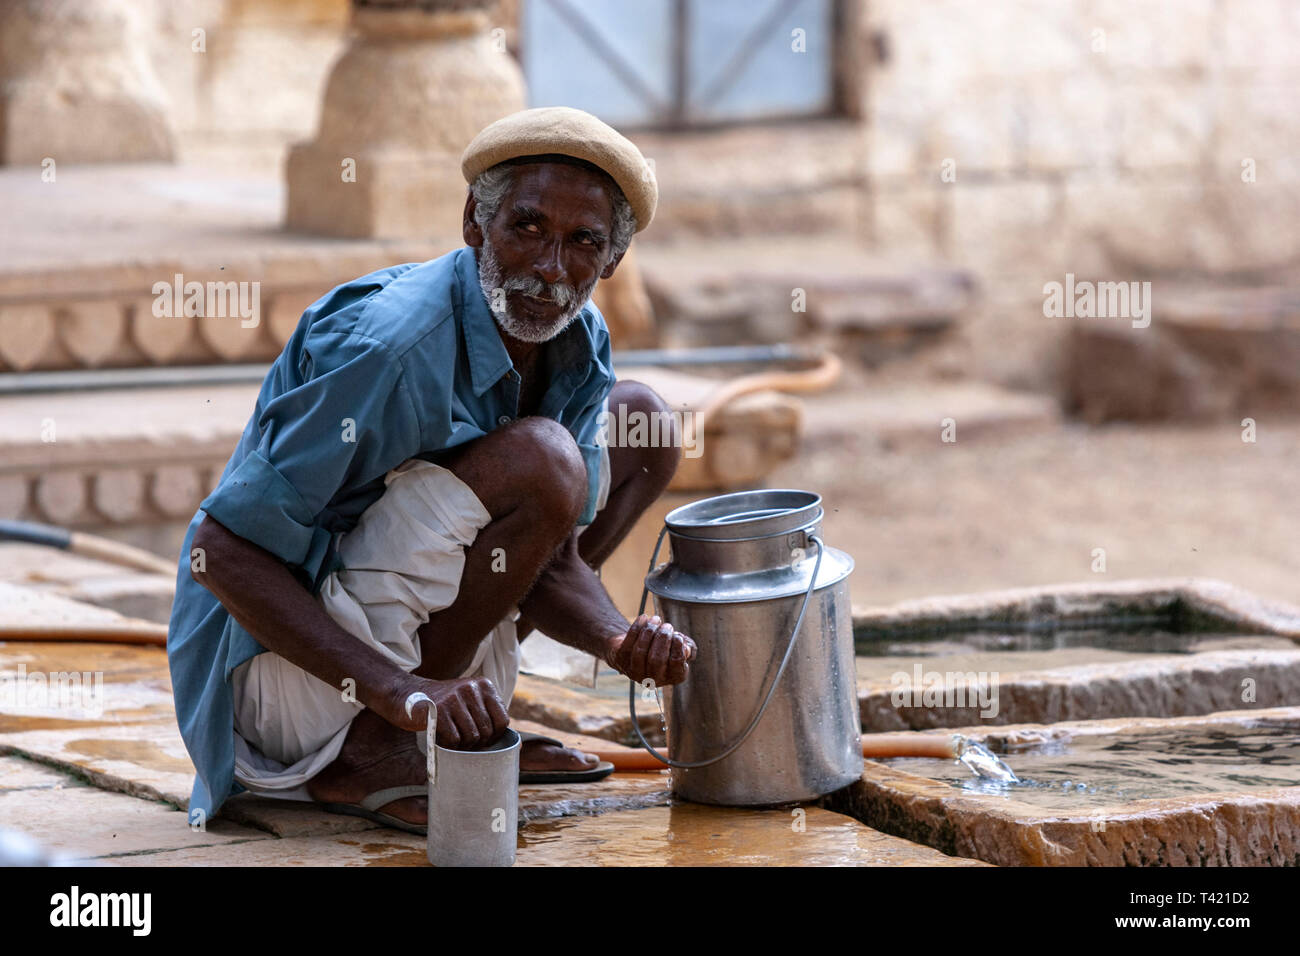 Man in charge of milk cows in Jaisalmer, Rajasthan, India Stock Photo